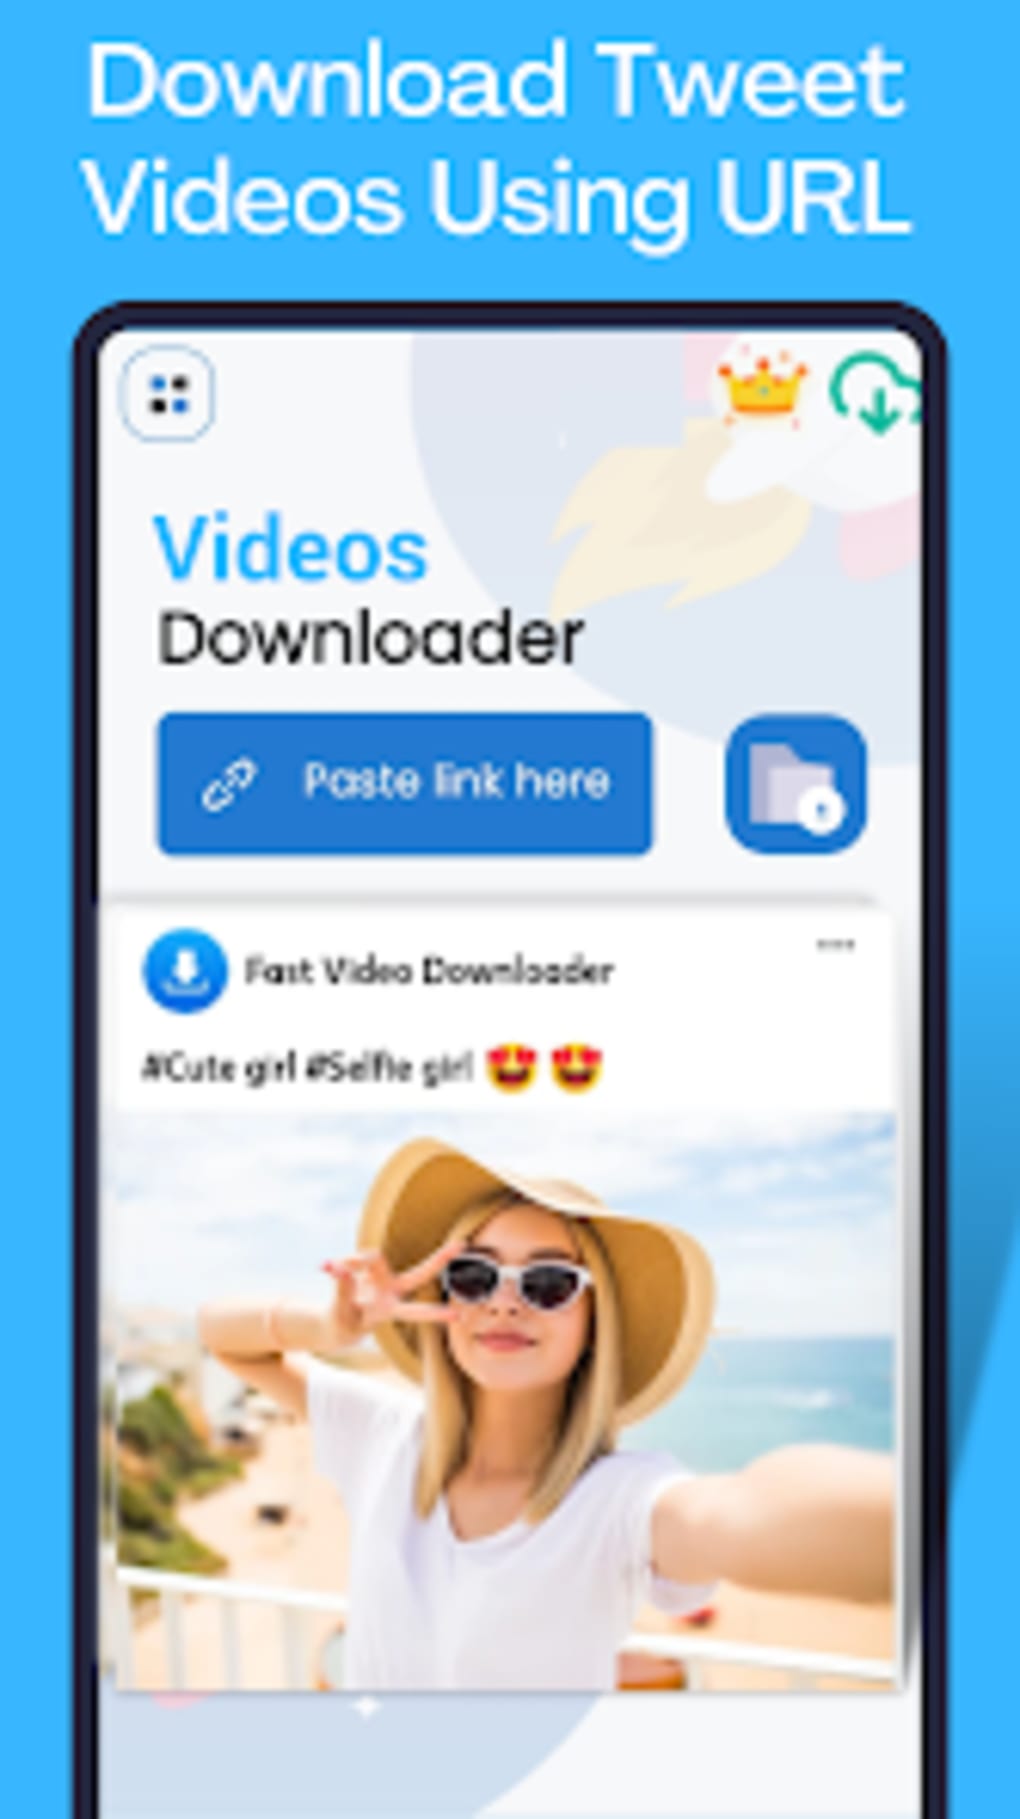 Downloader for Kwai - No Logo for Android - Free App Download